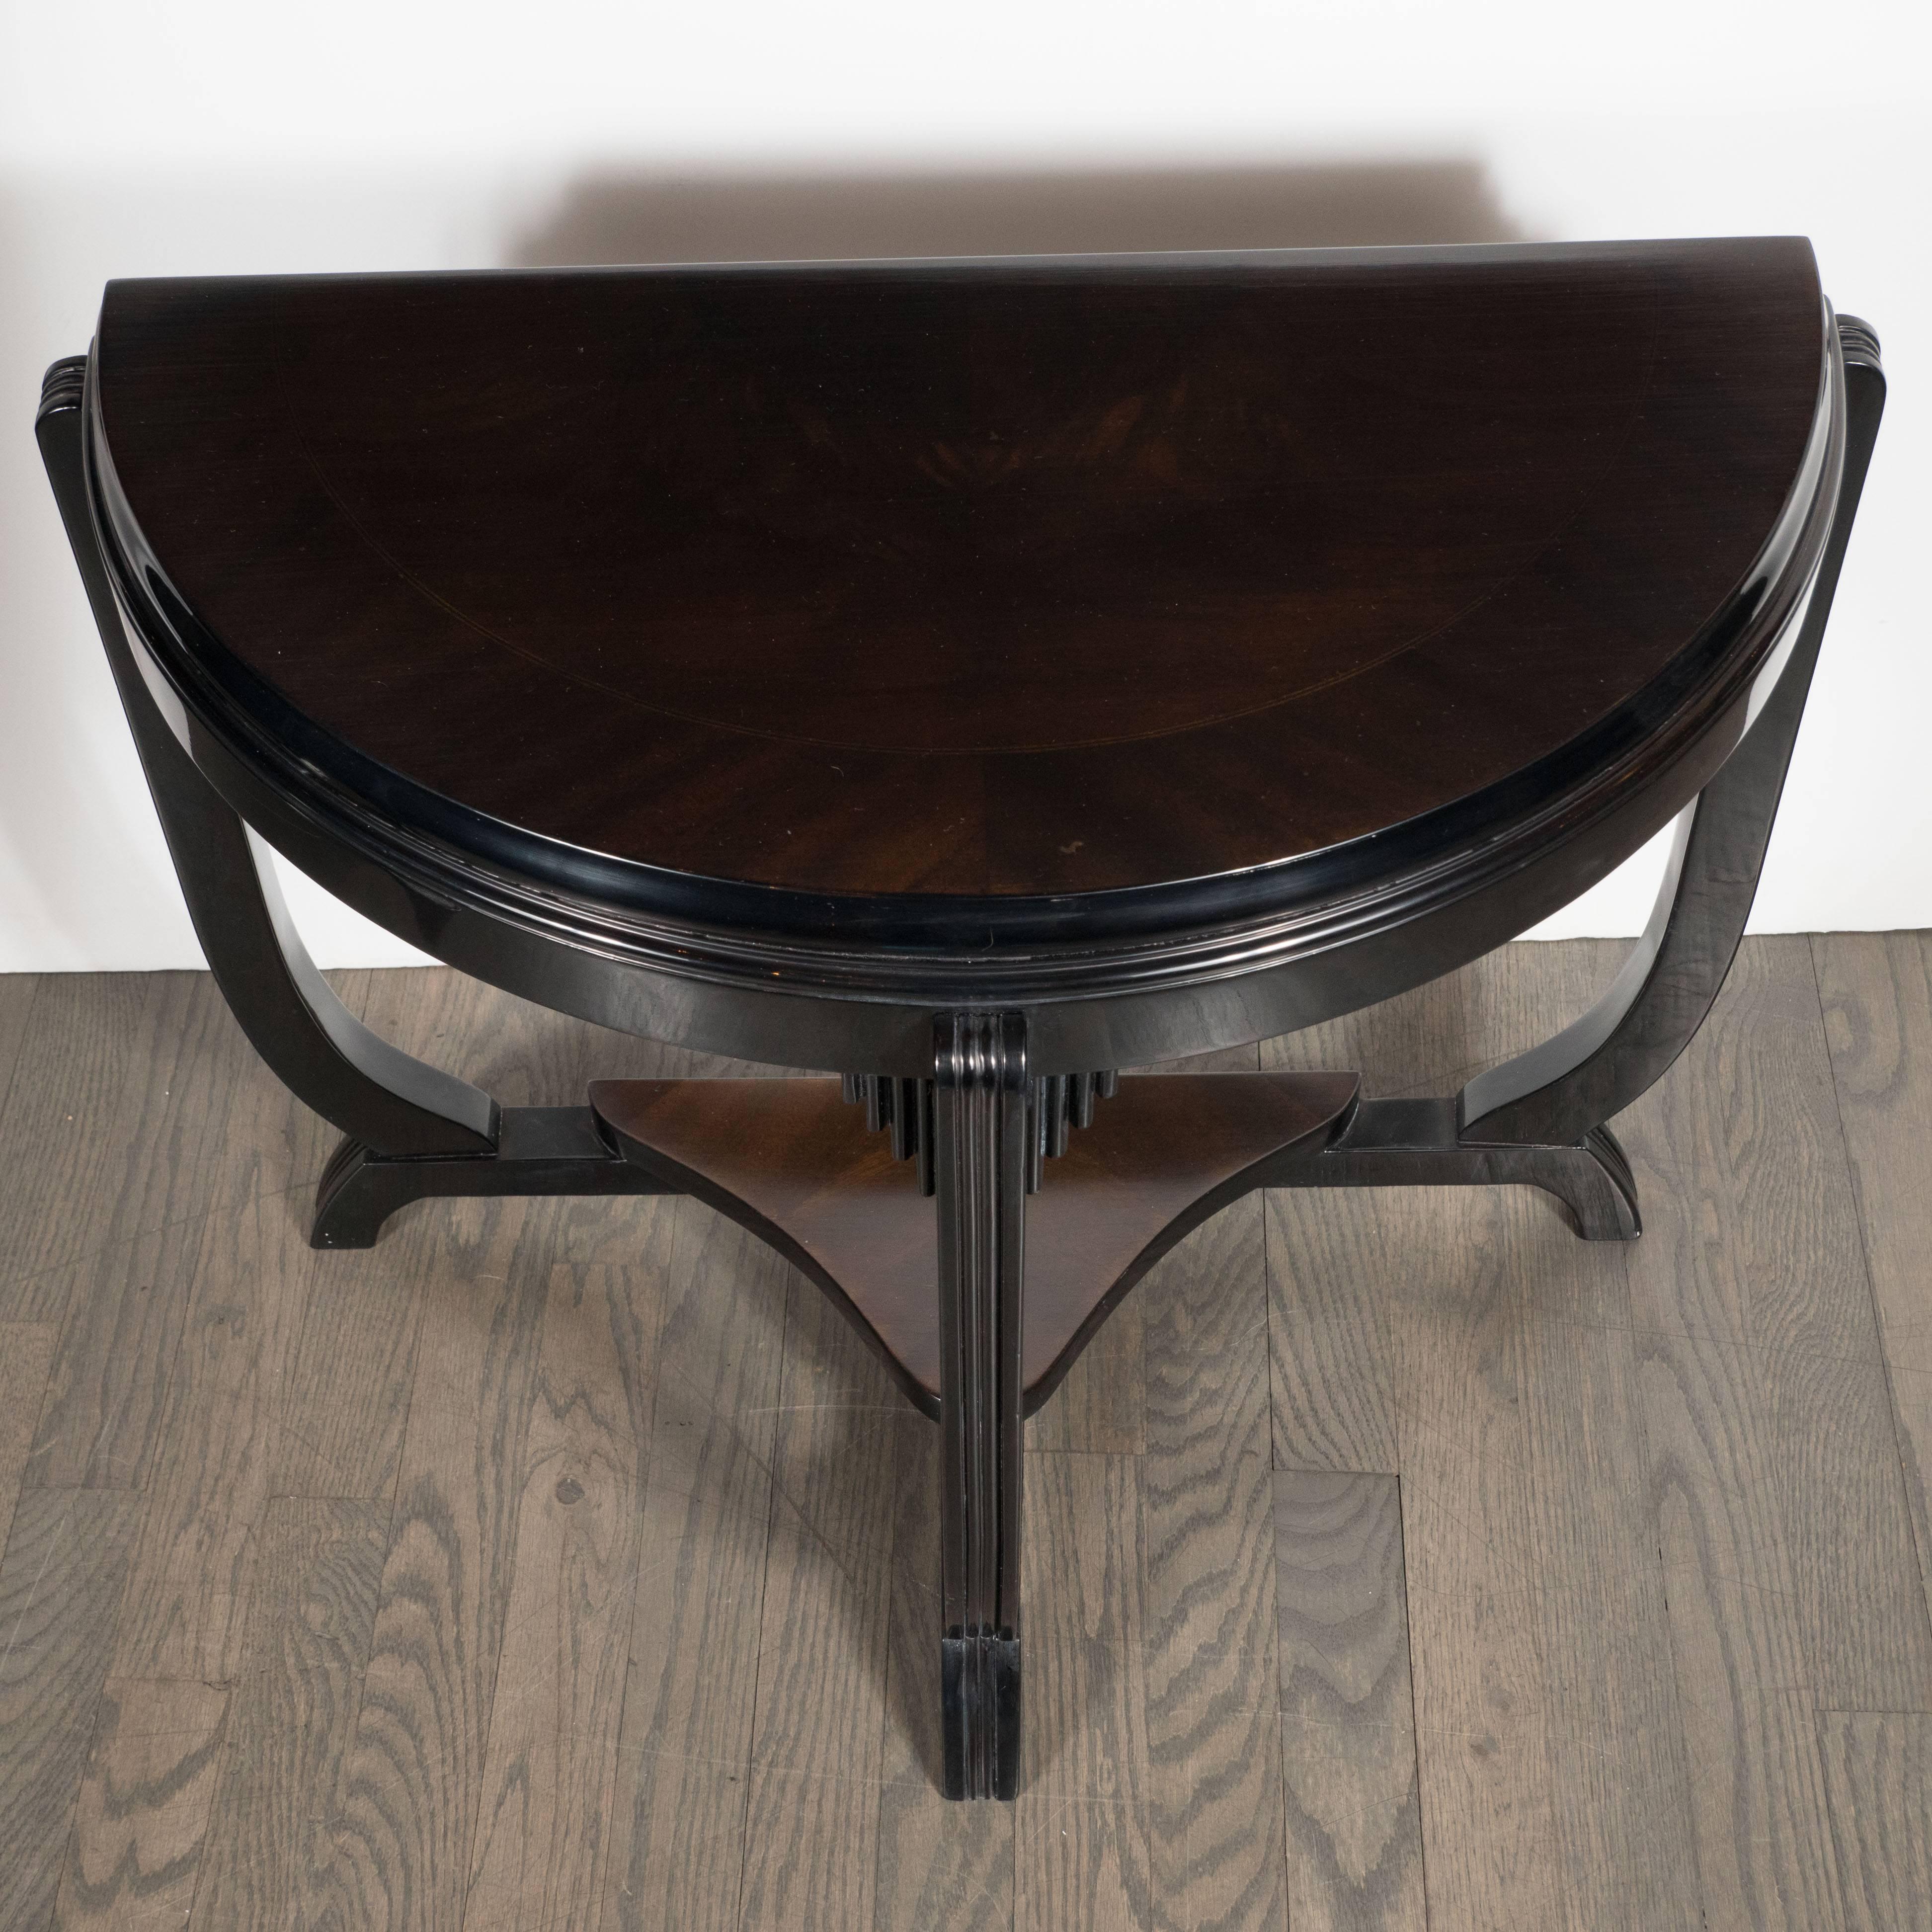 Mid-20th Century Art Deco Skyscraper Style Demilune Table in Book-Matched Walnut and Mahogany